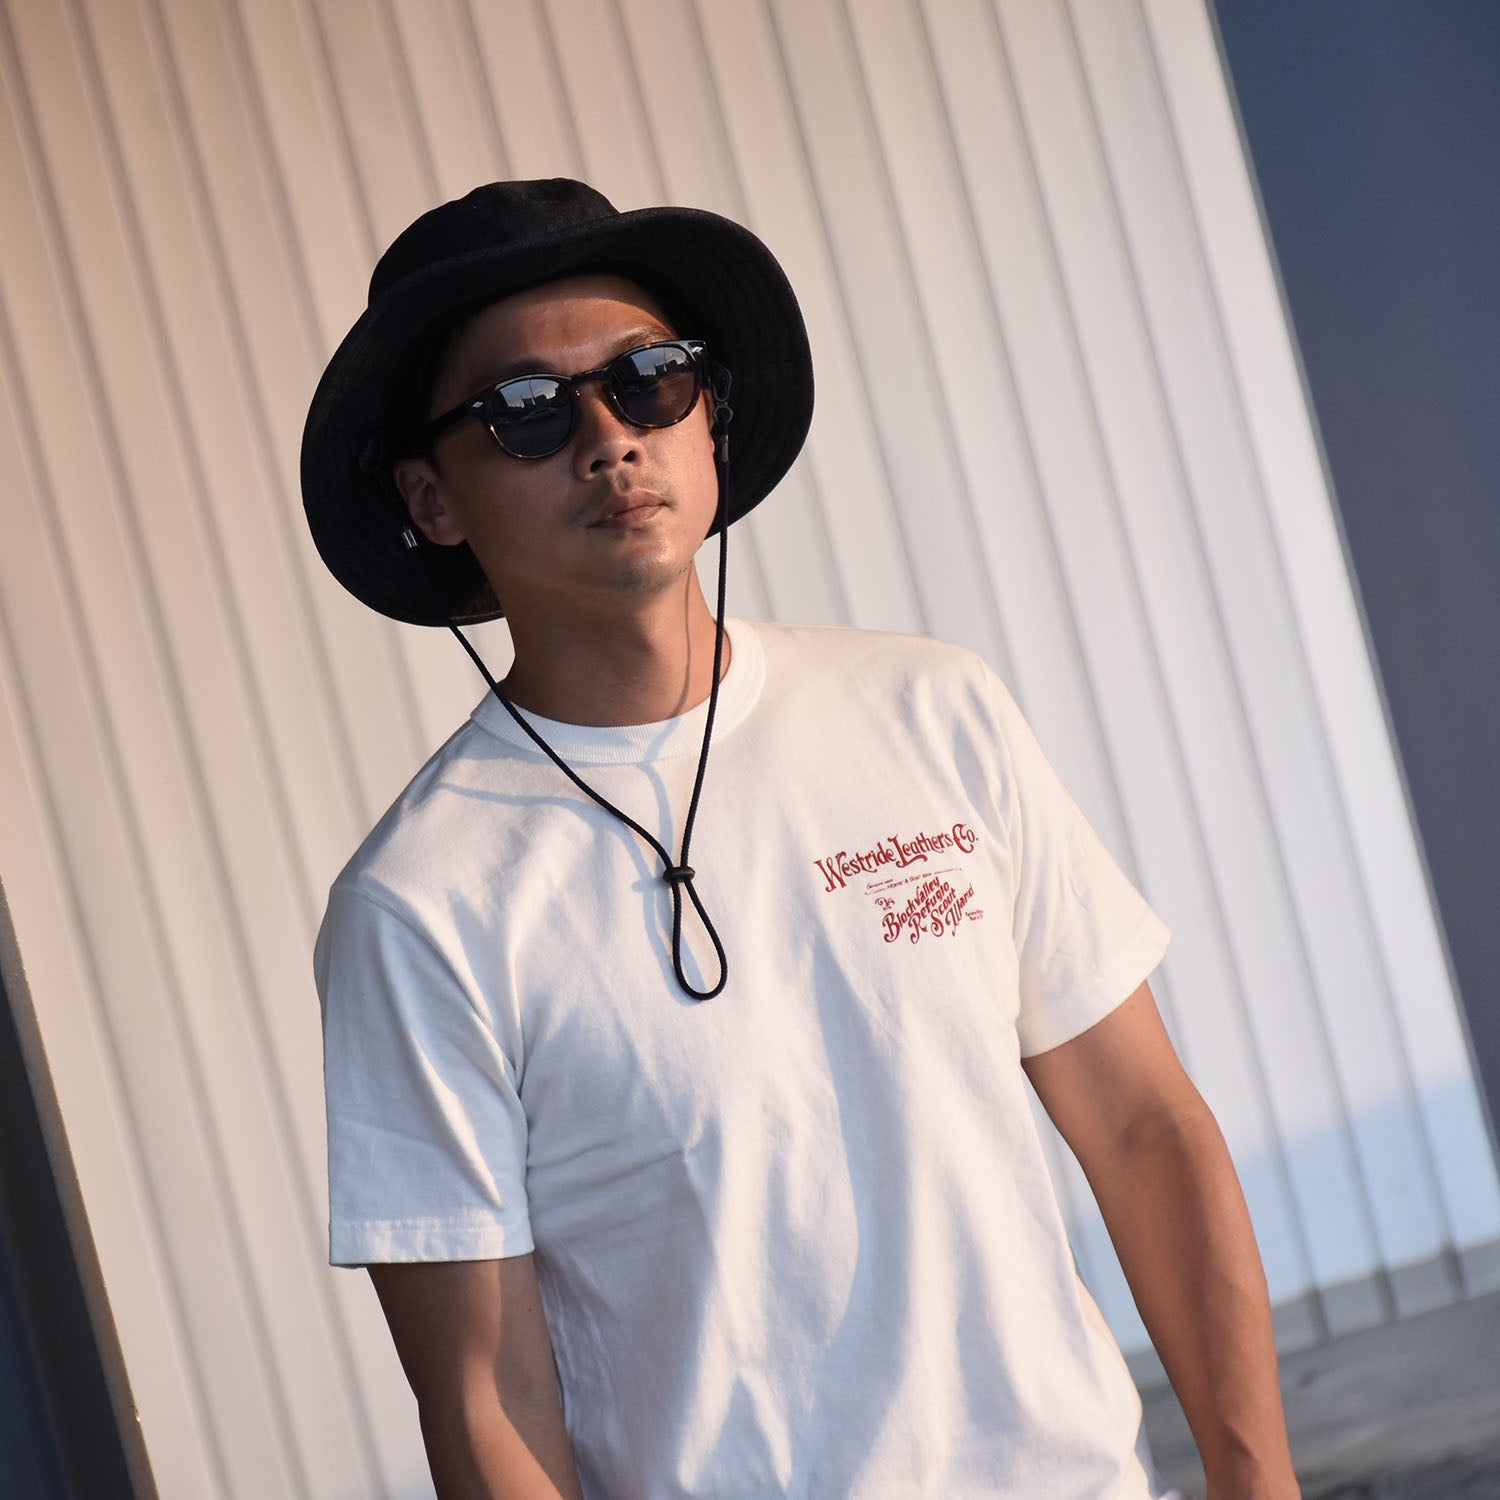 "WR LEATHER CO." TEE - WHITE - May club